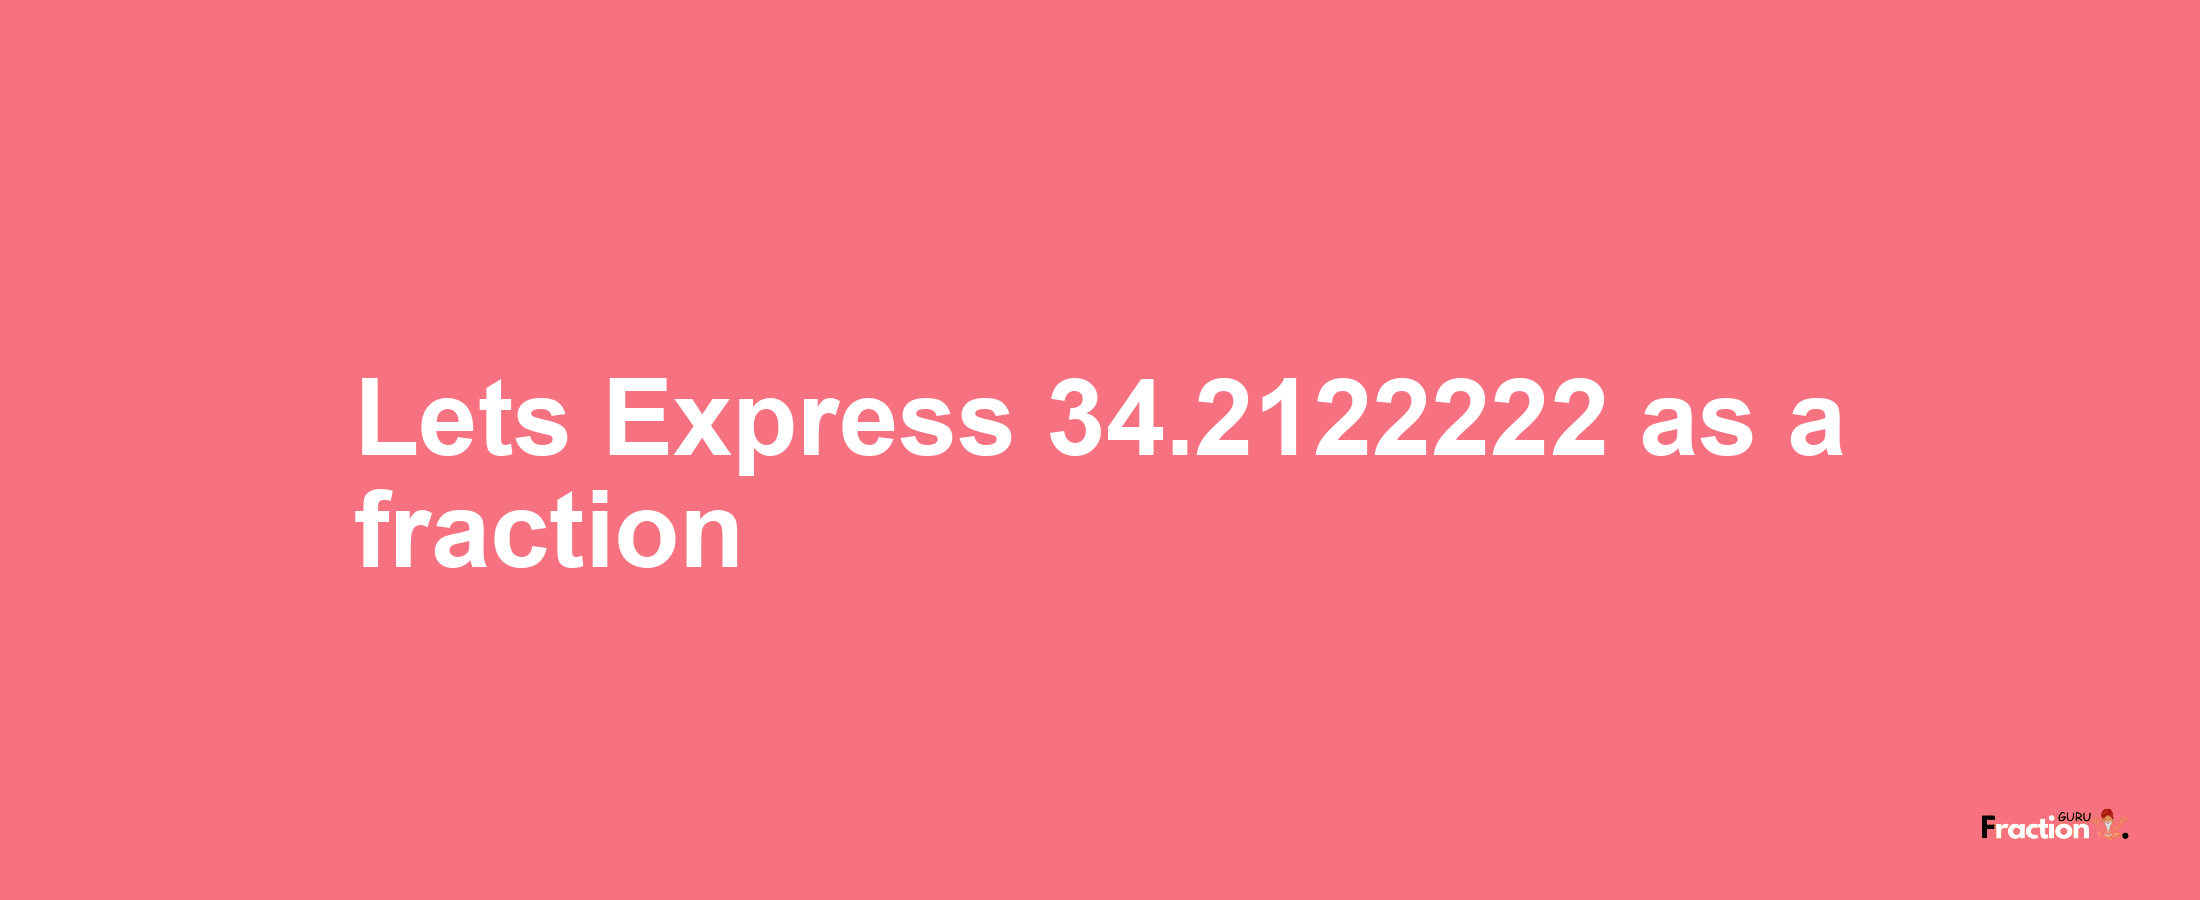 Lets Express 34.2122222 as afraction